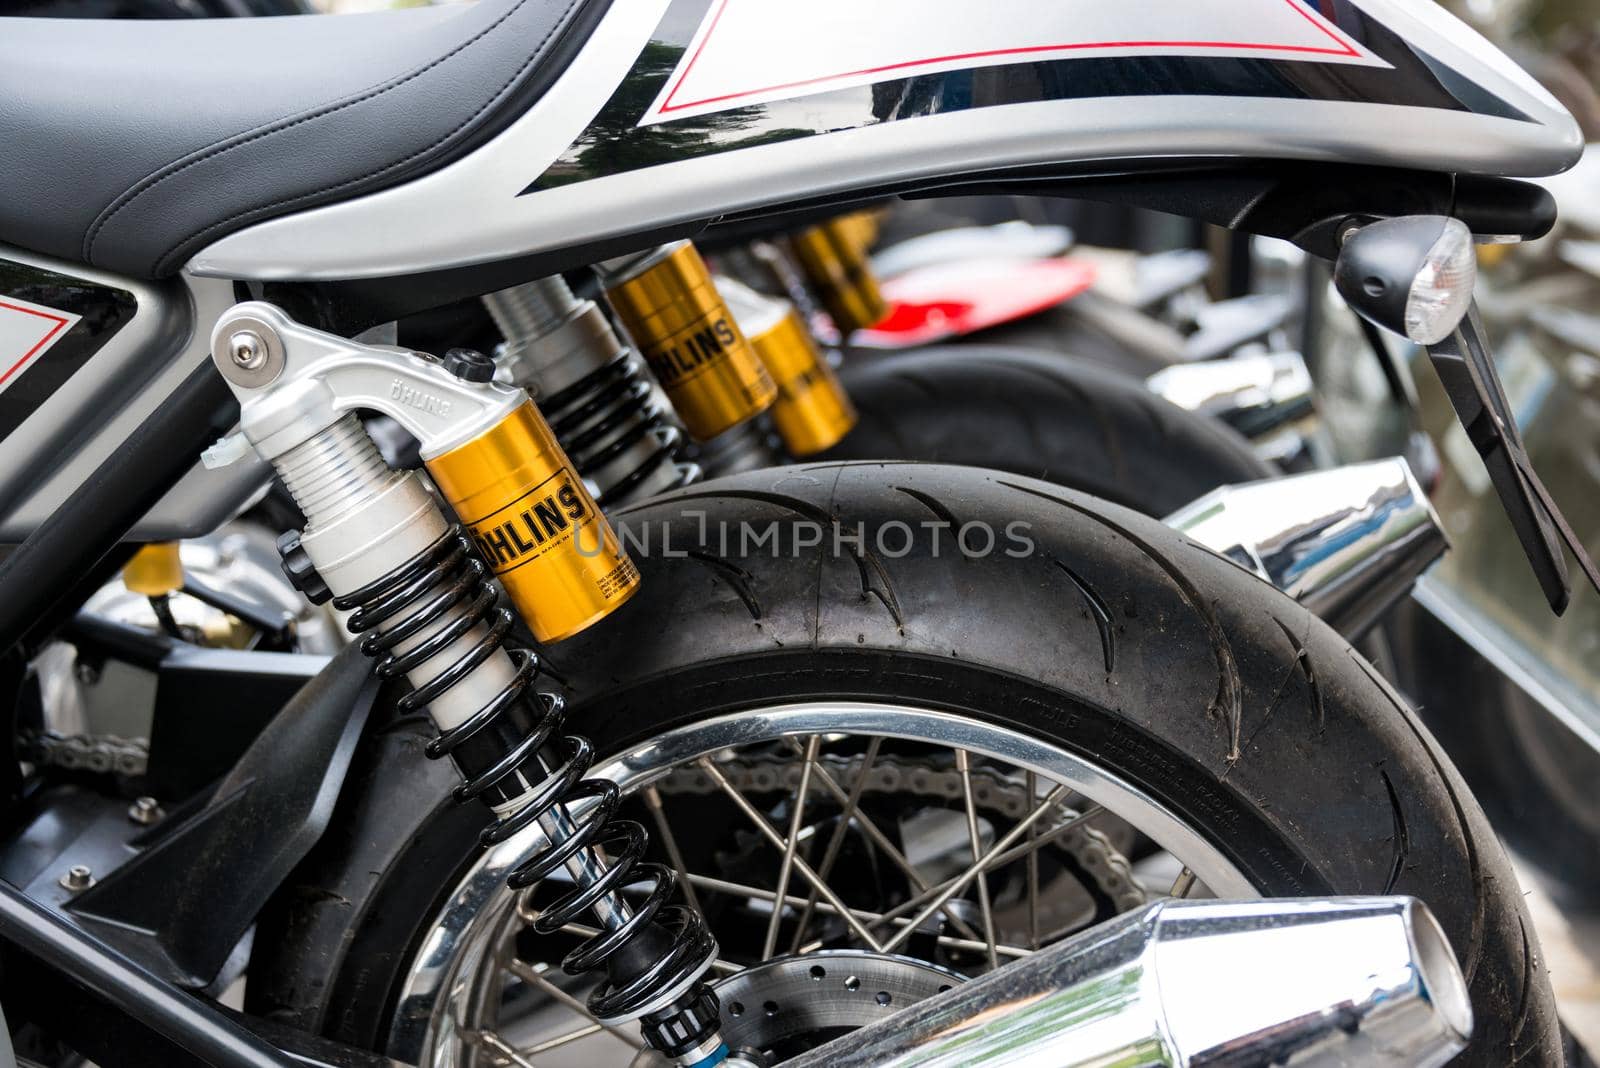 PARIS, FRANCE - CIRCA MAY 2013: Ohlins shock absorbers, motorcycle rear suspsension detail.